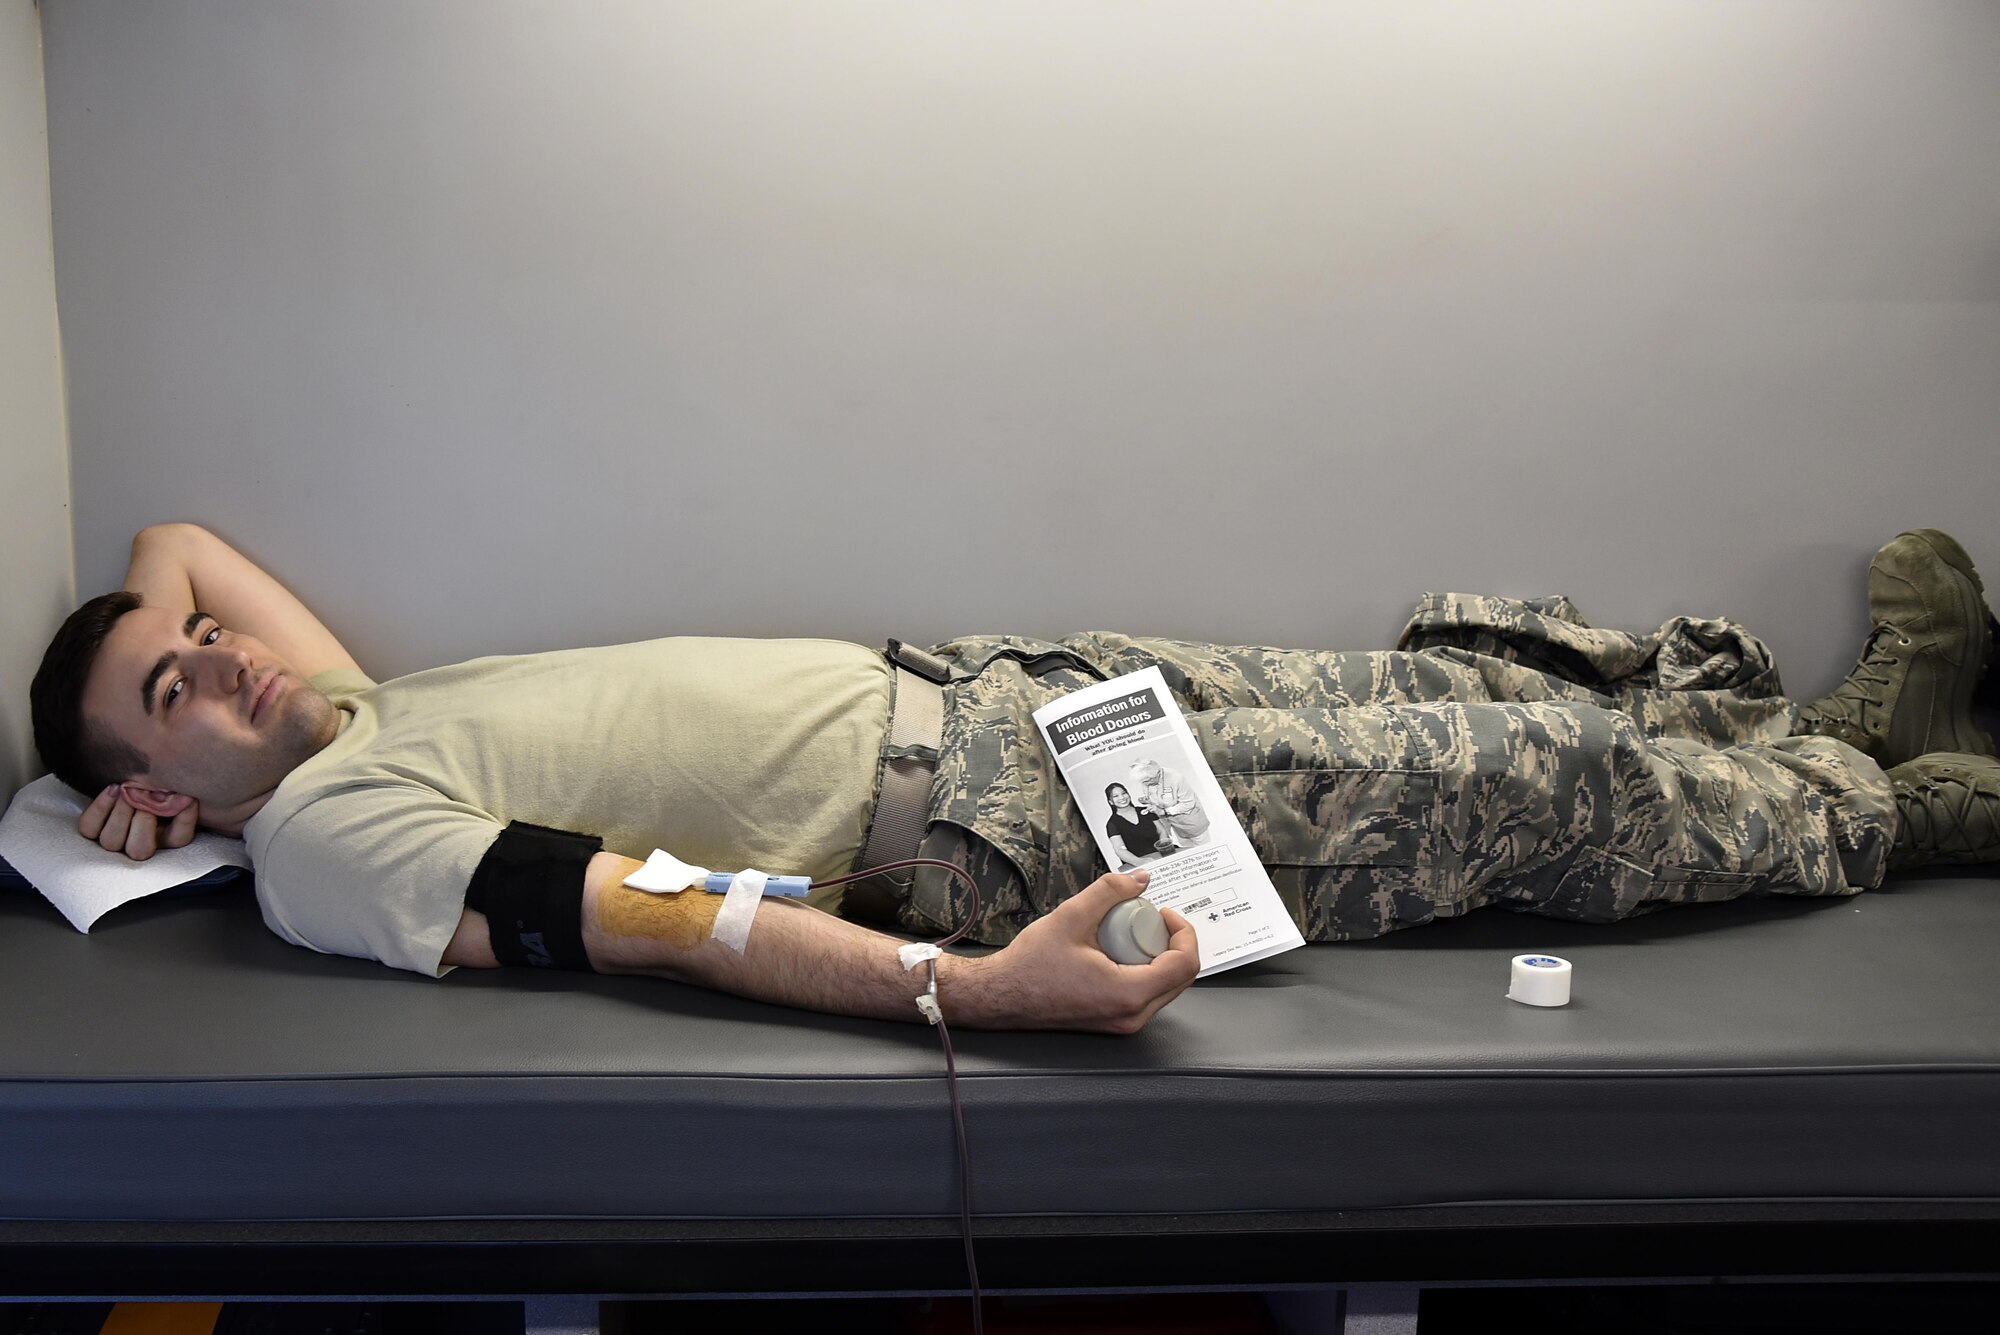 Staff Sgt. Jose Bulls, financial management systems administrator in the 175th Comptroller Flight, participates in a blood drive June 15, 2017 at Warfield Air National Guard Base, Middle River, Md. This is Bulls’ third time donating blood on base. (U.S. Air National Guard photo by Airman Sarah M. McClanahan)